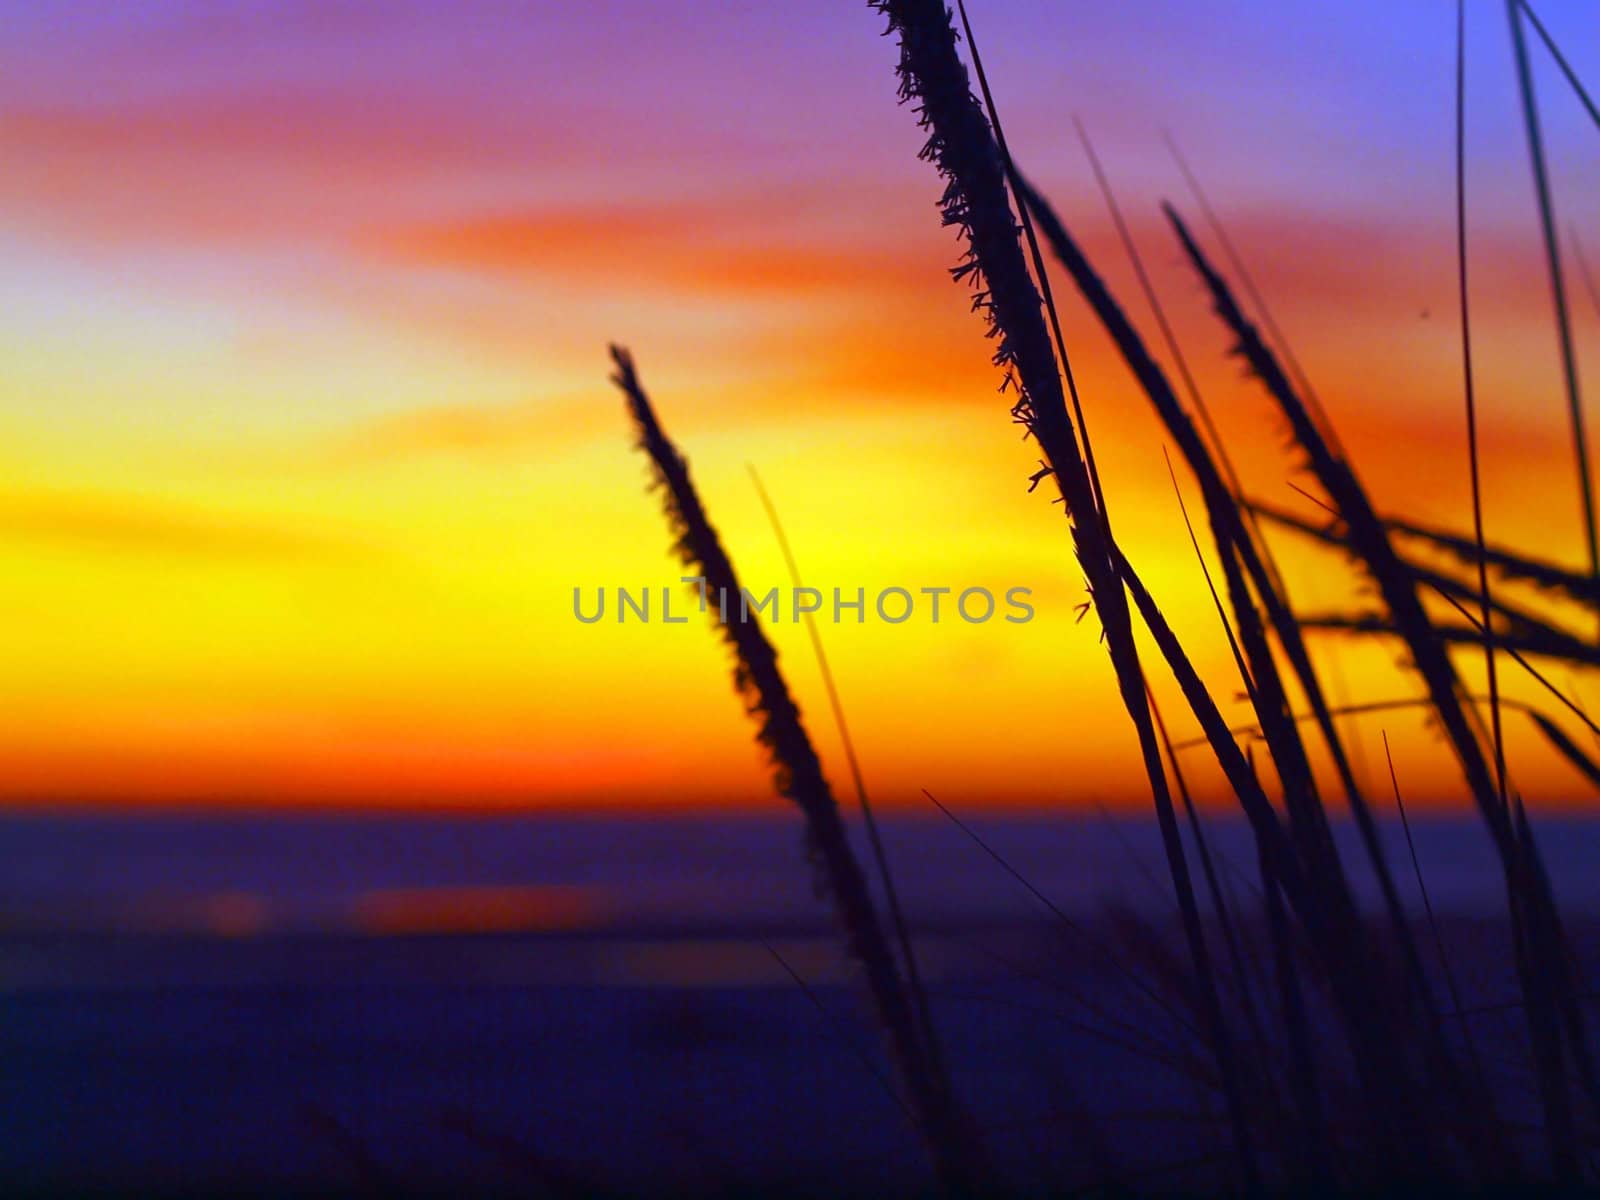 Golden Sunset at the Beach with Tall Grass in the Wind